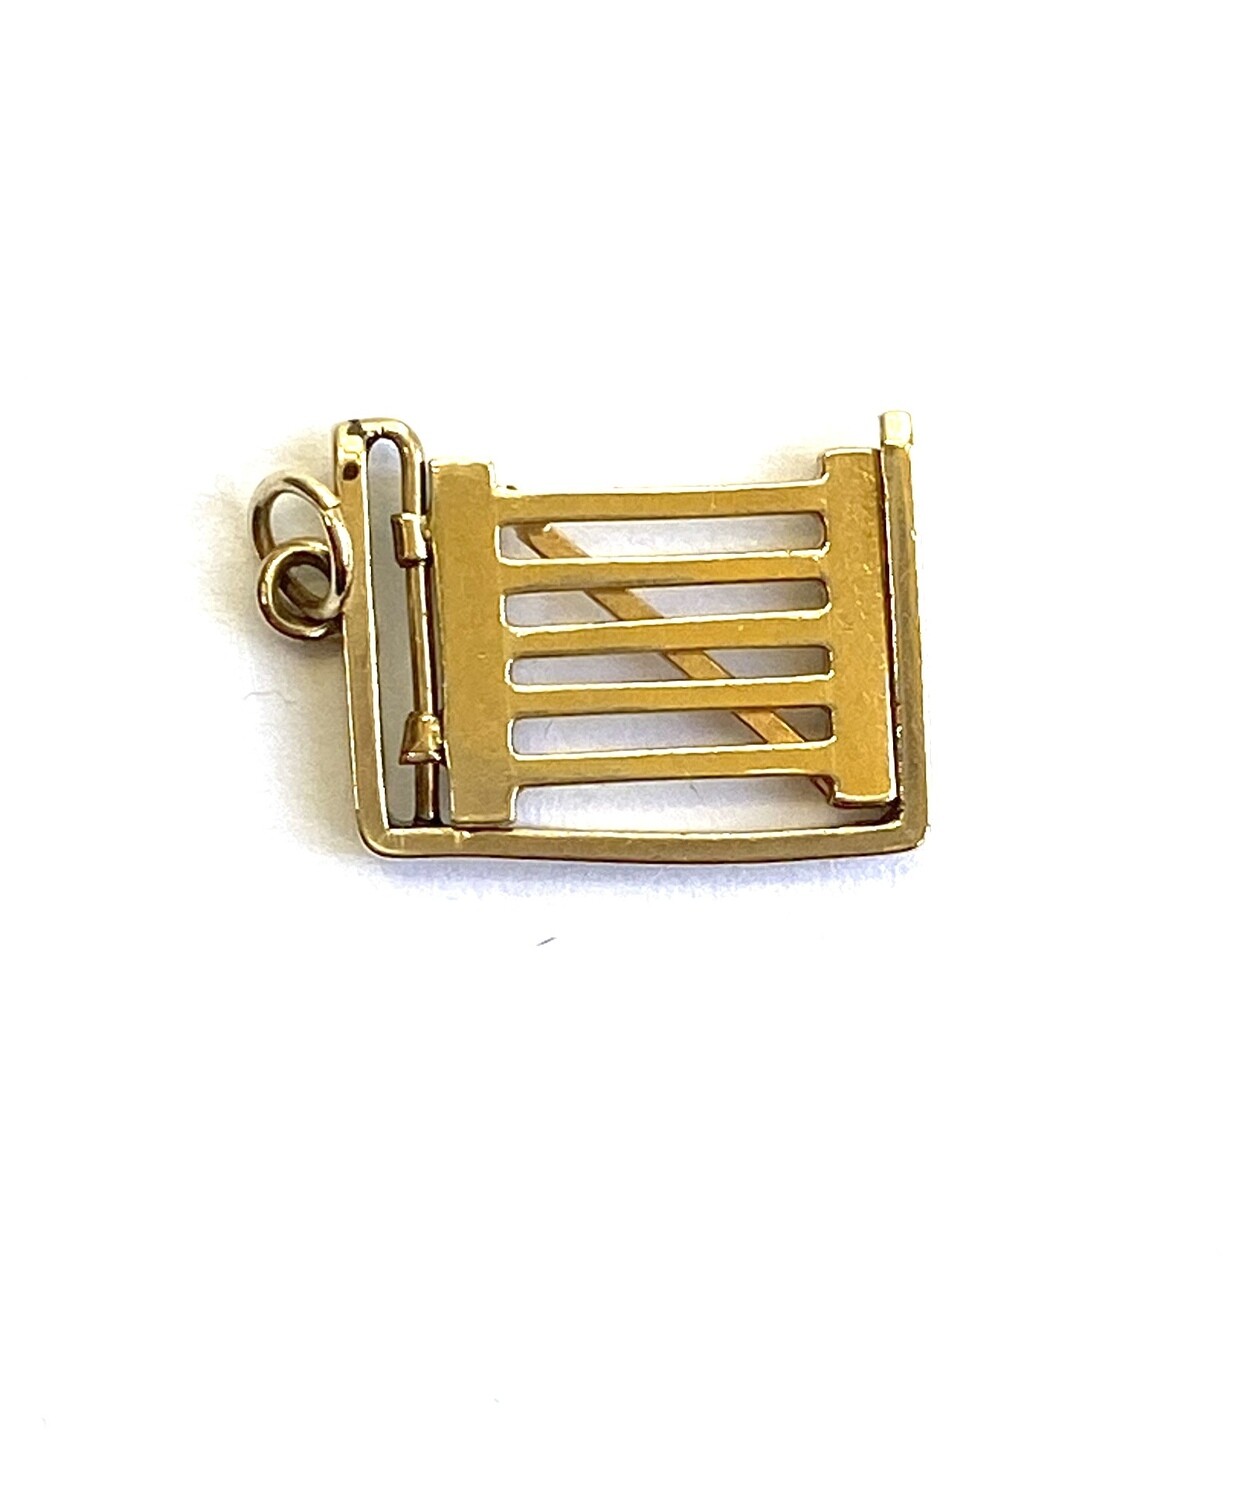 9ct vintage opening gate charm circa 1948 by Crop and Farr